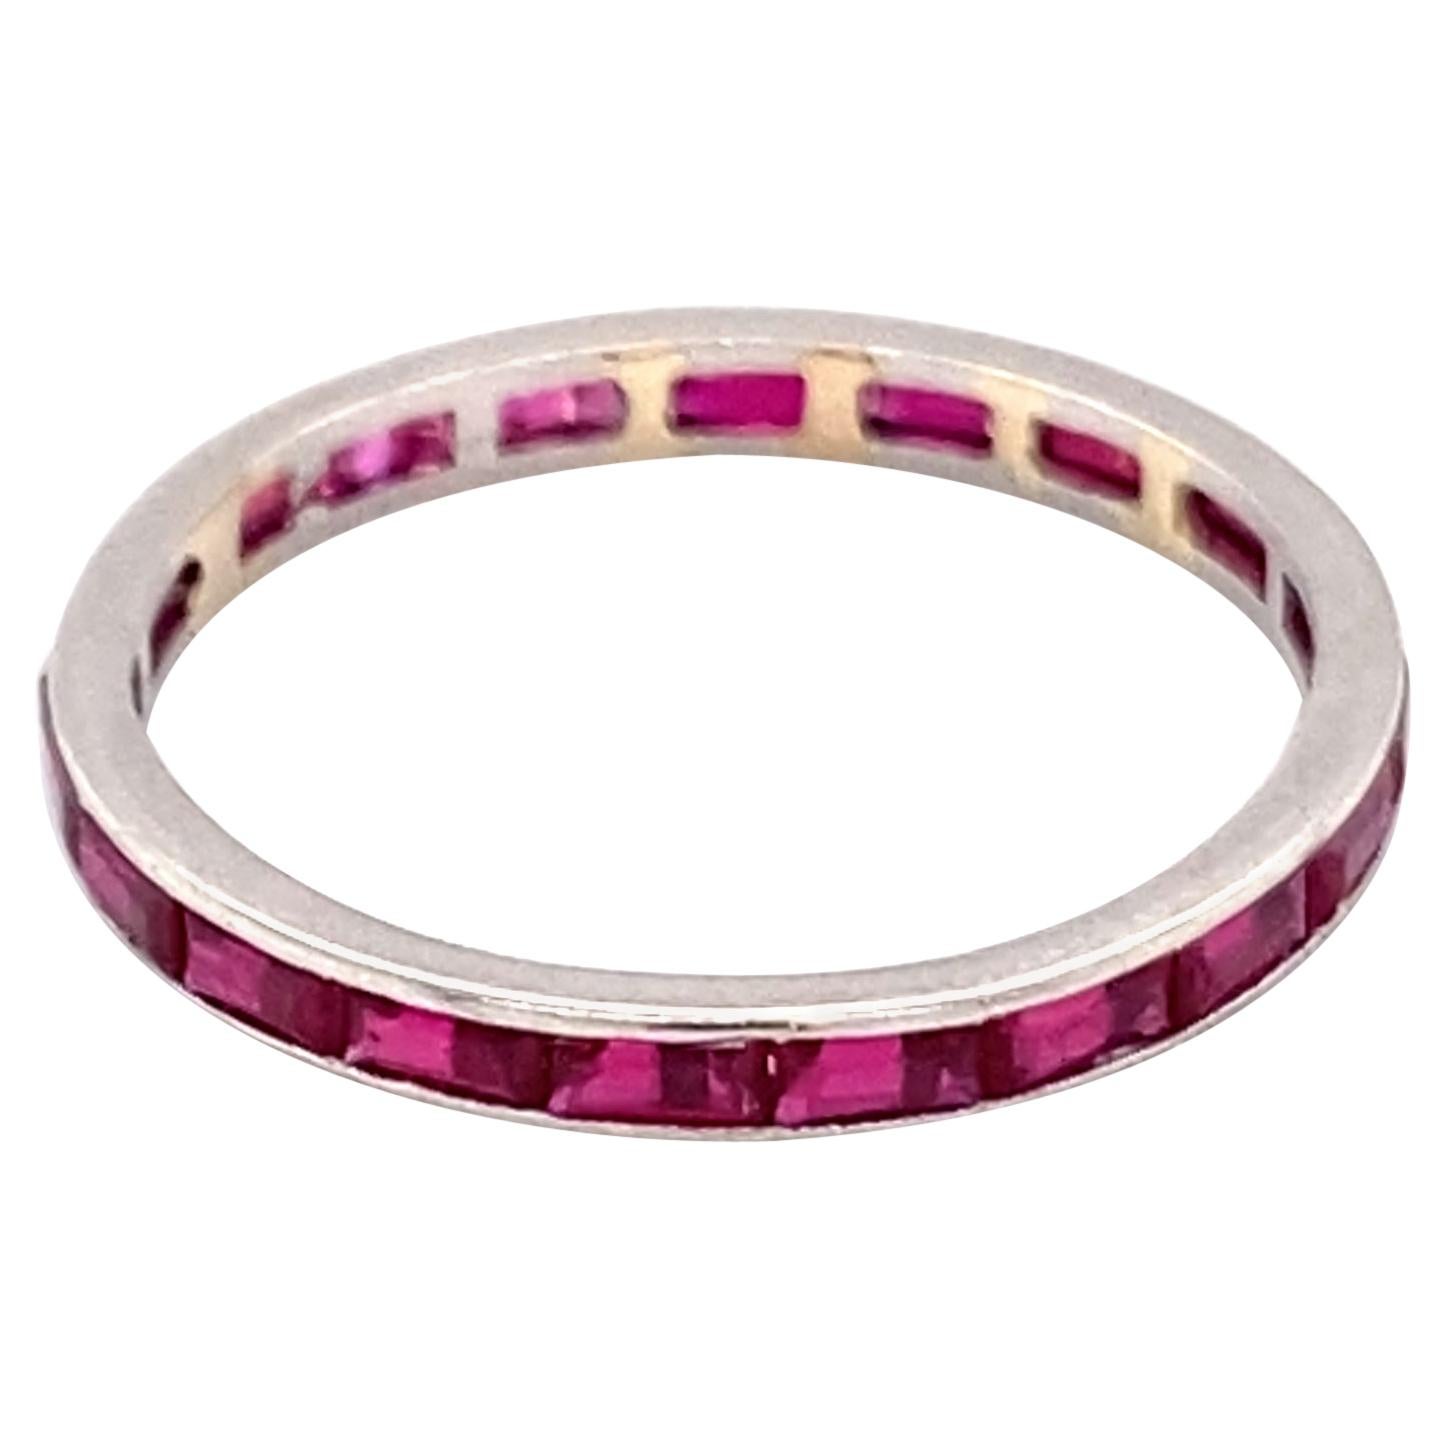 1940s 0.40 Carat Ruby Eternity Band Ring in Platinum For Sale